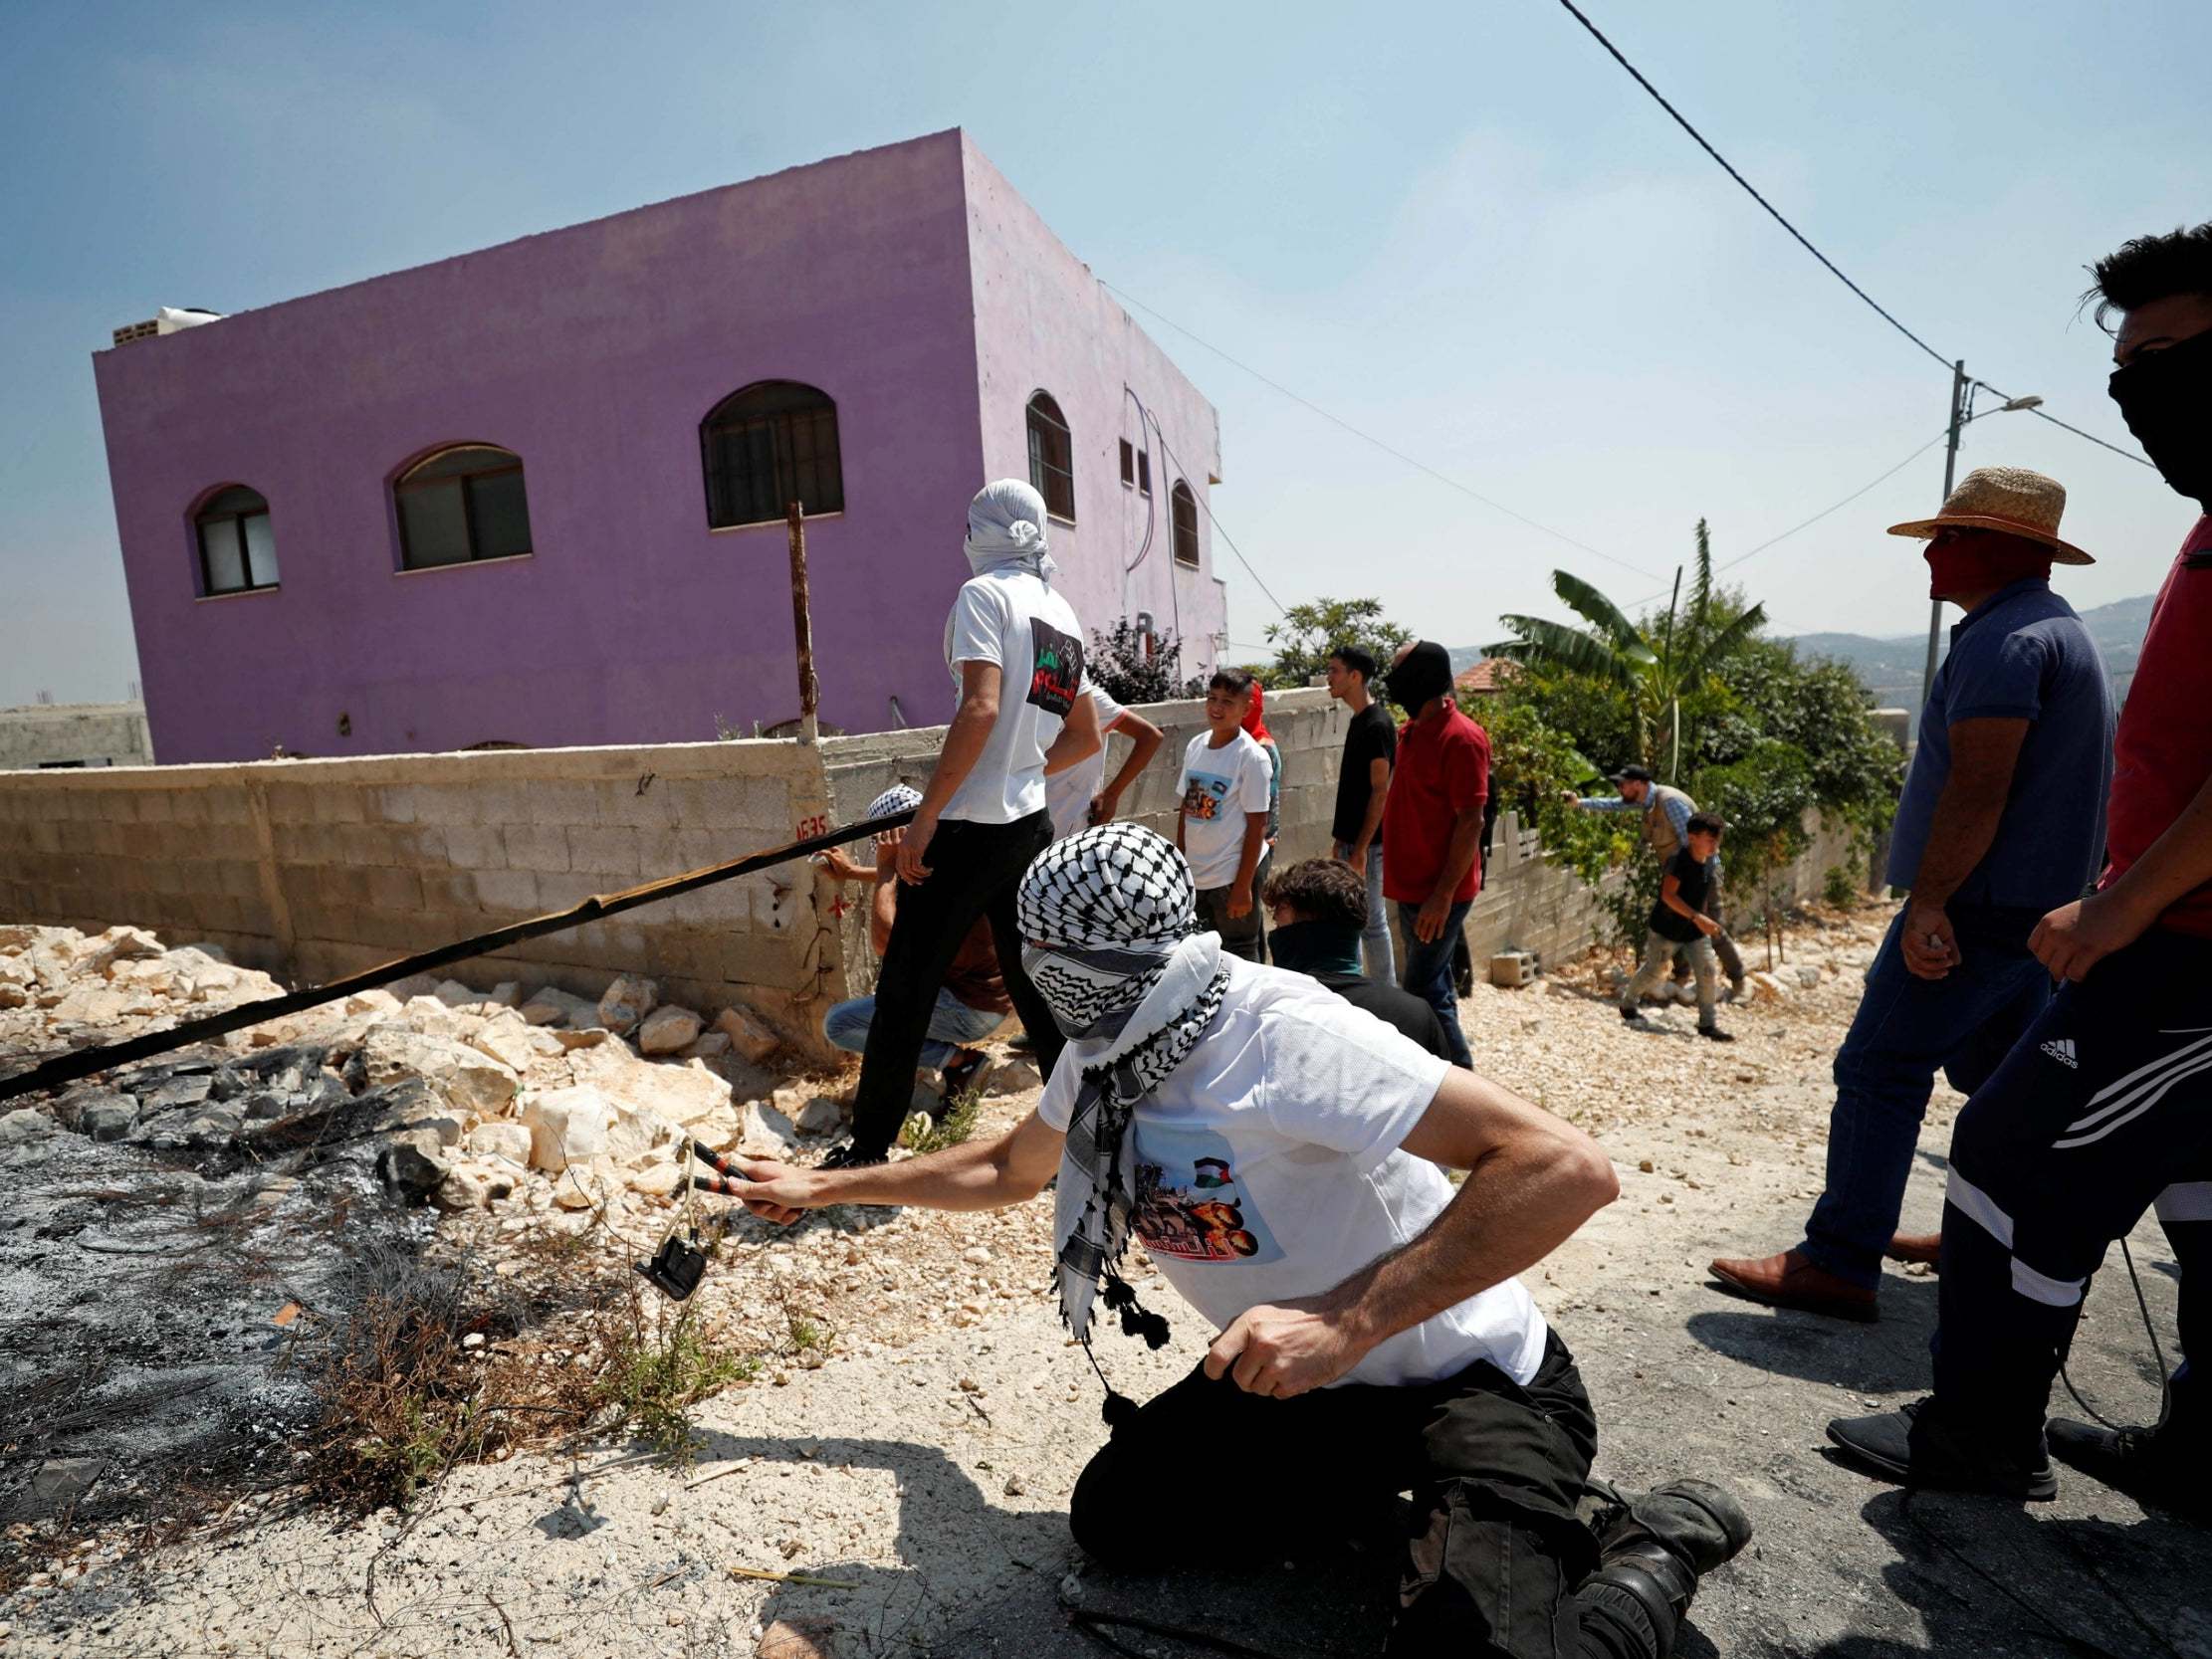 Palestinian demonstrator hurls stones at Israeli forces during July 2019 protest against Jewish settlement of Qadomem in the occupied West Bank